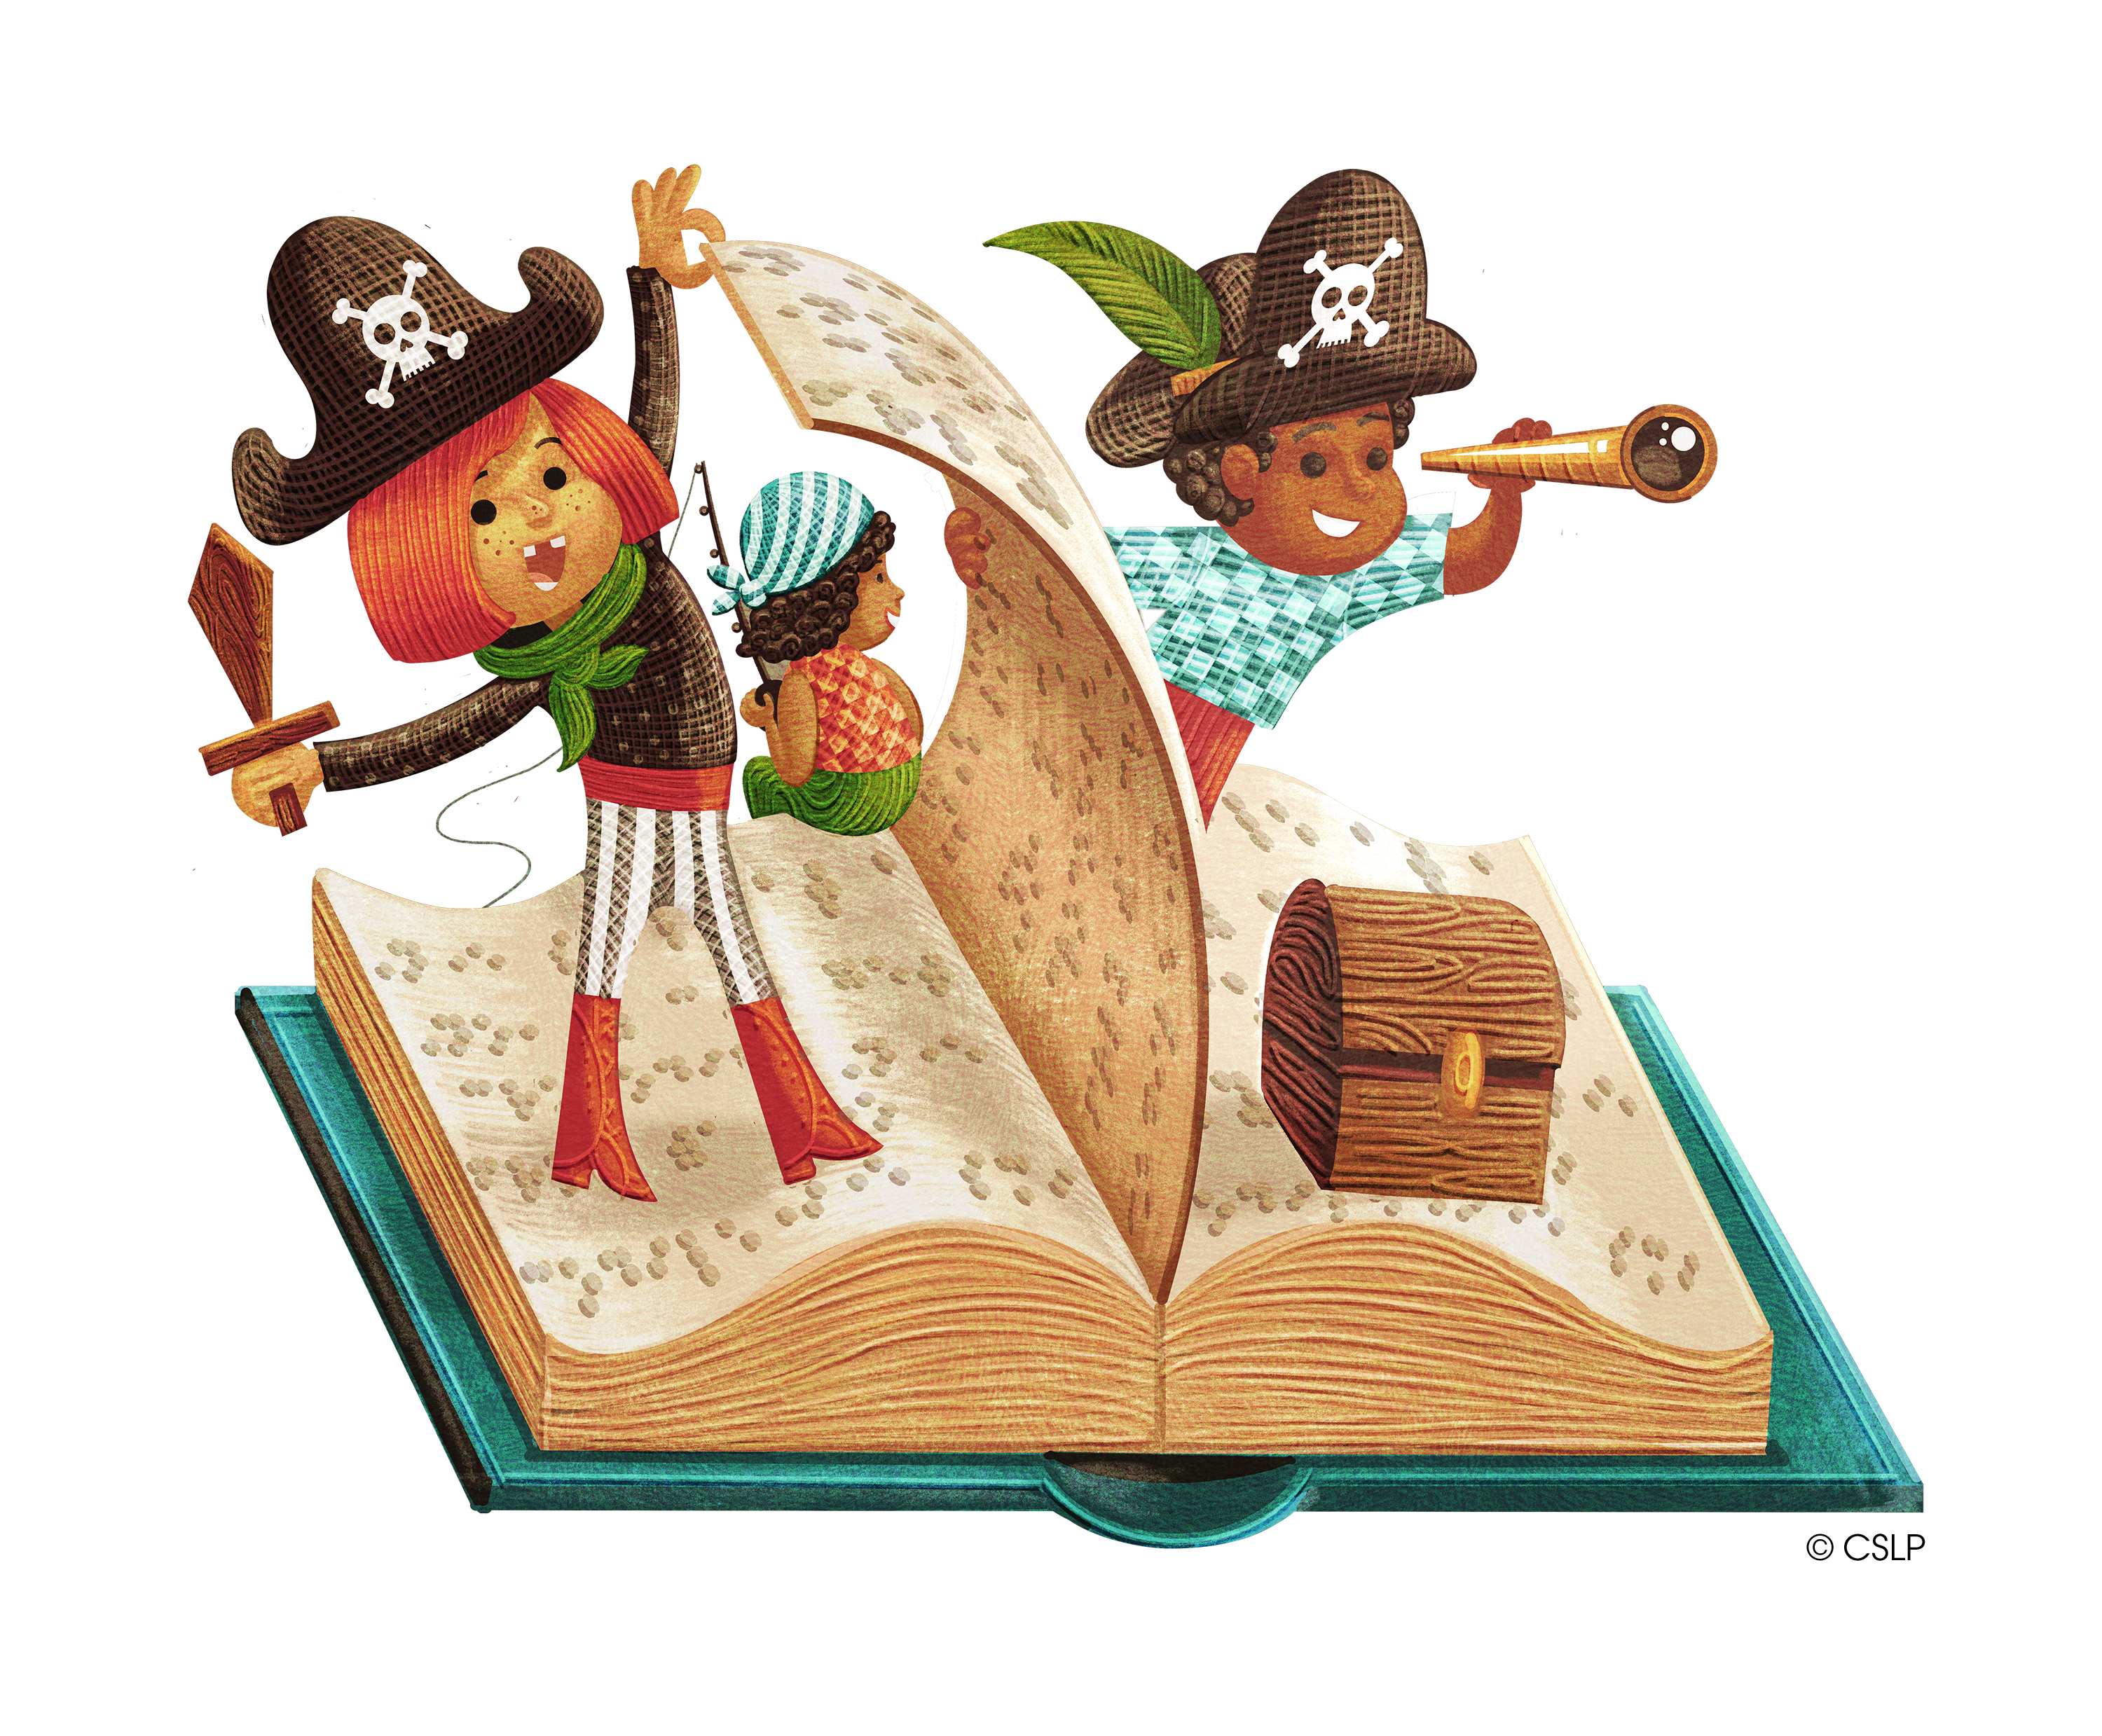 Illustration of two children dressed as pirates standing on an open book.